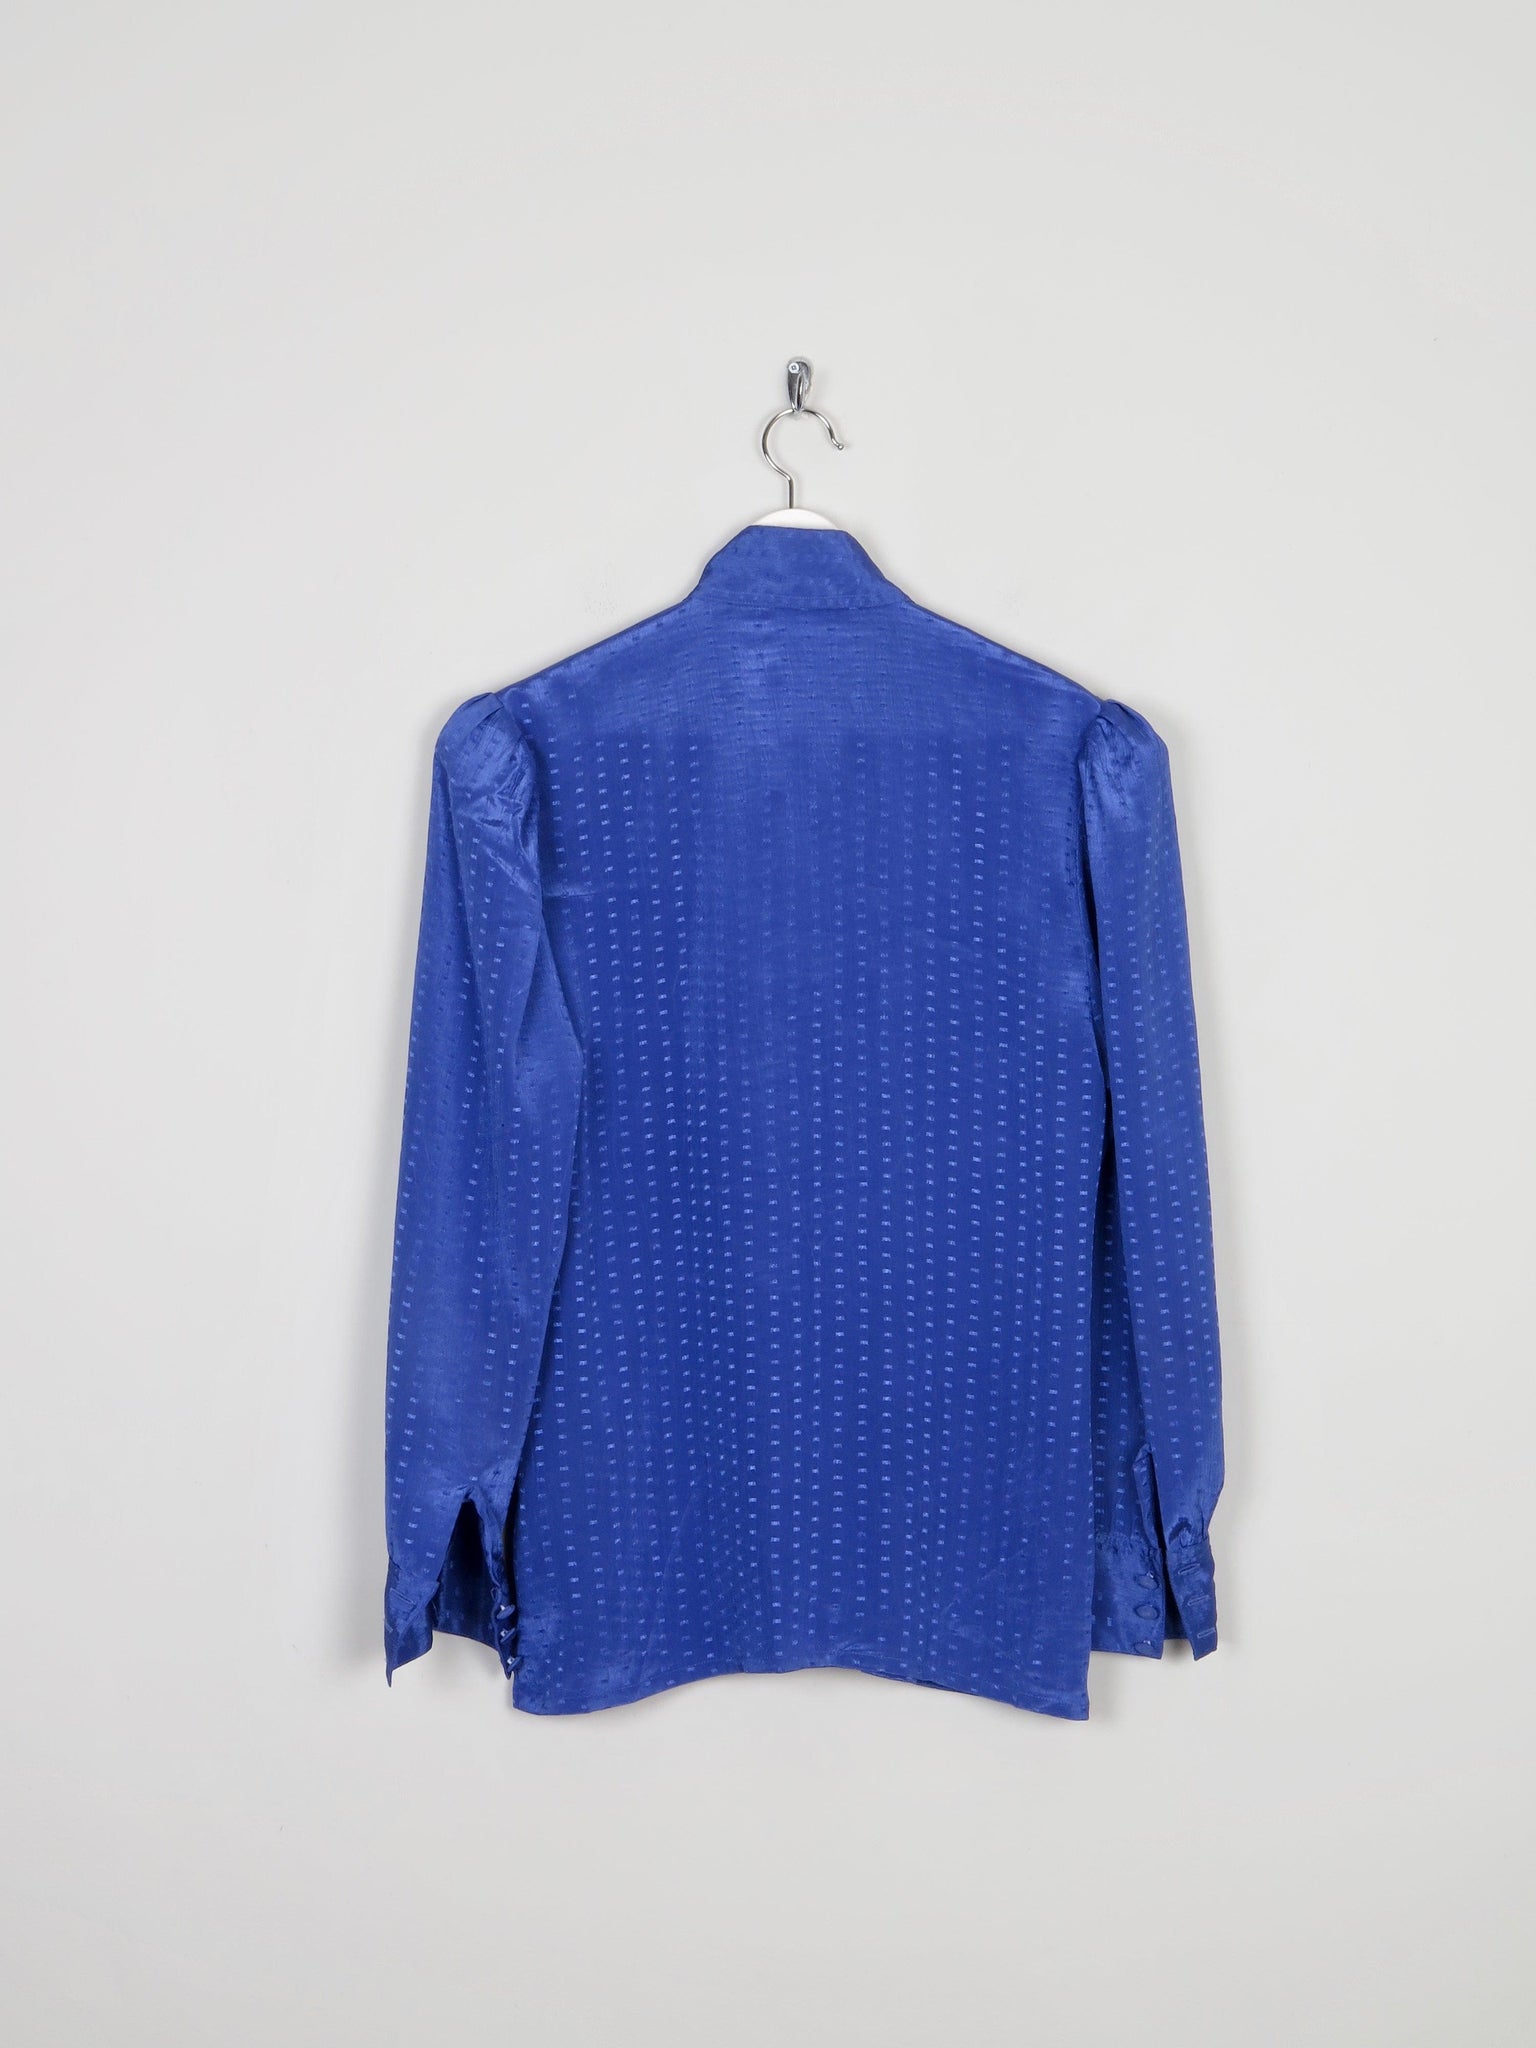 Women’s Electric Blue Betty Barclay Vintage Blouse With Frills 10 - The Harlequin